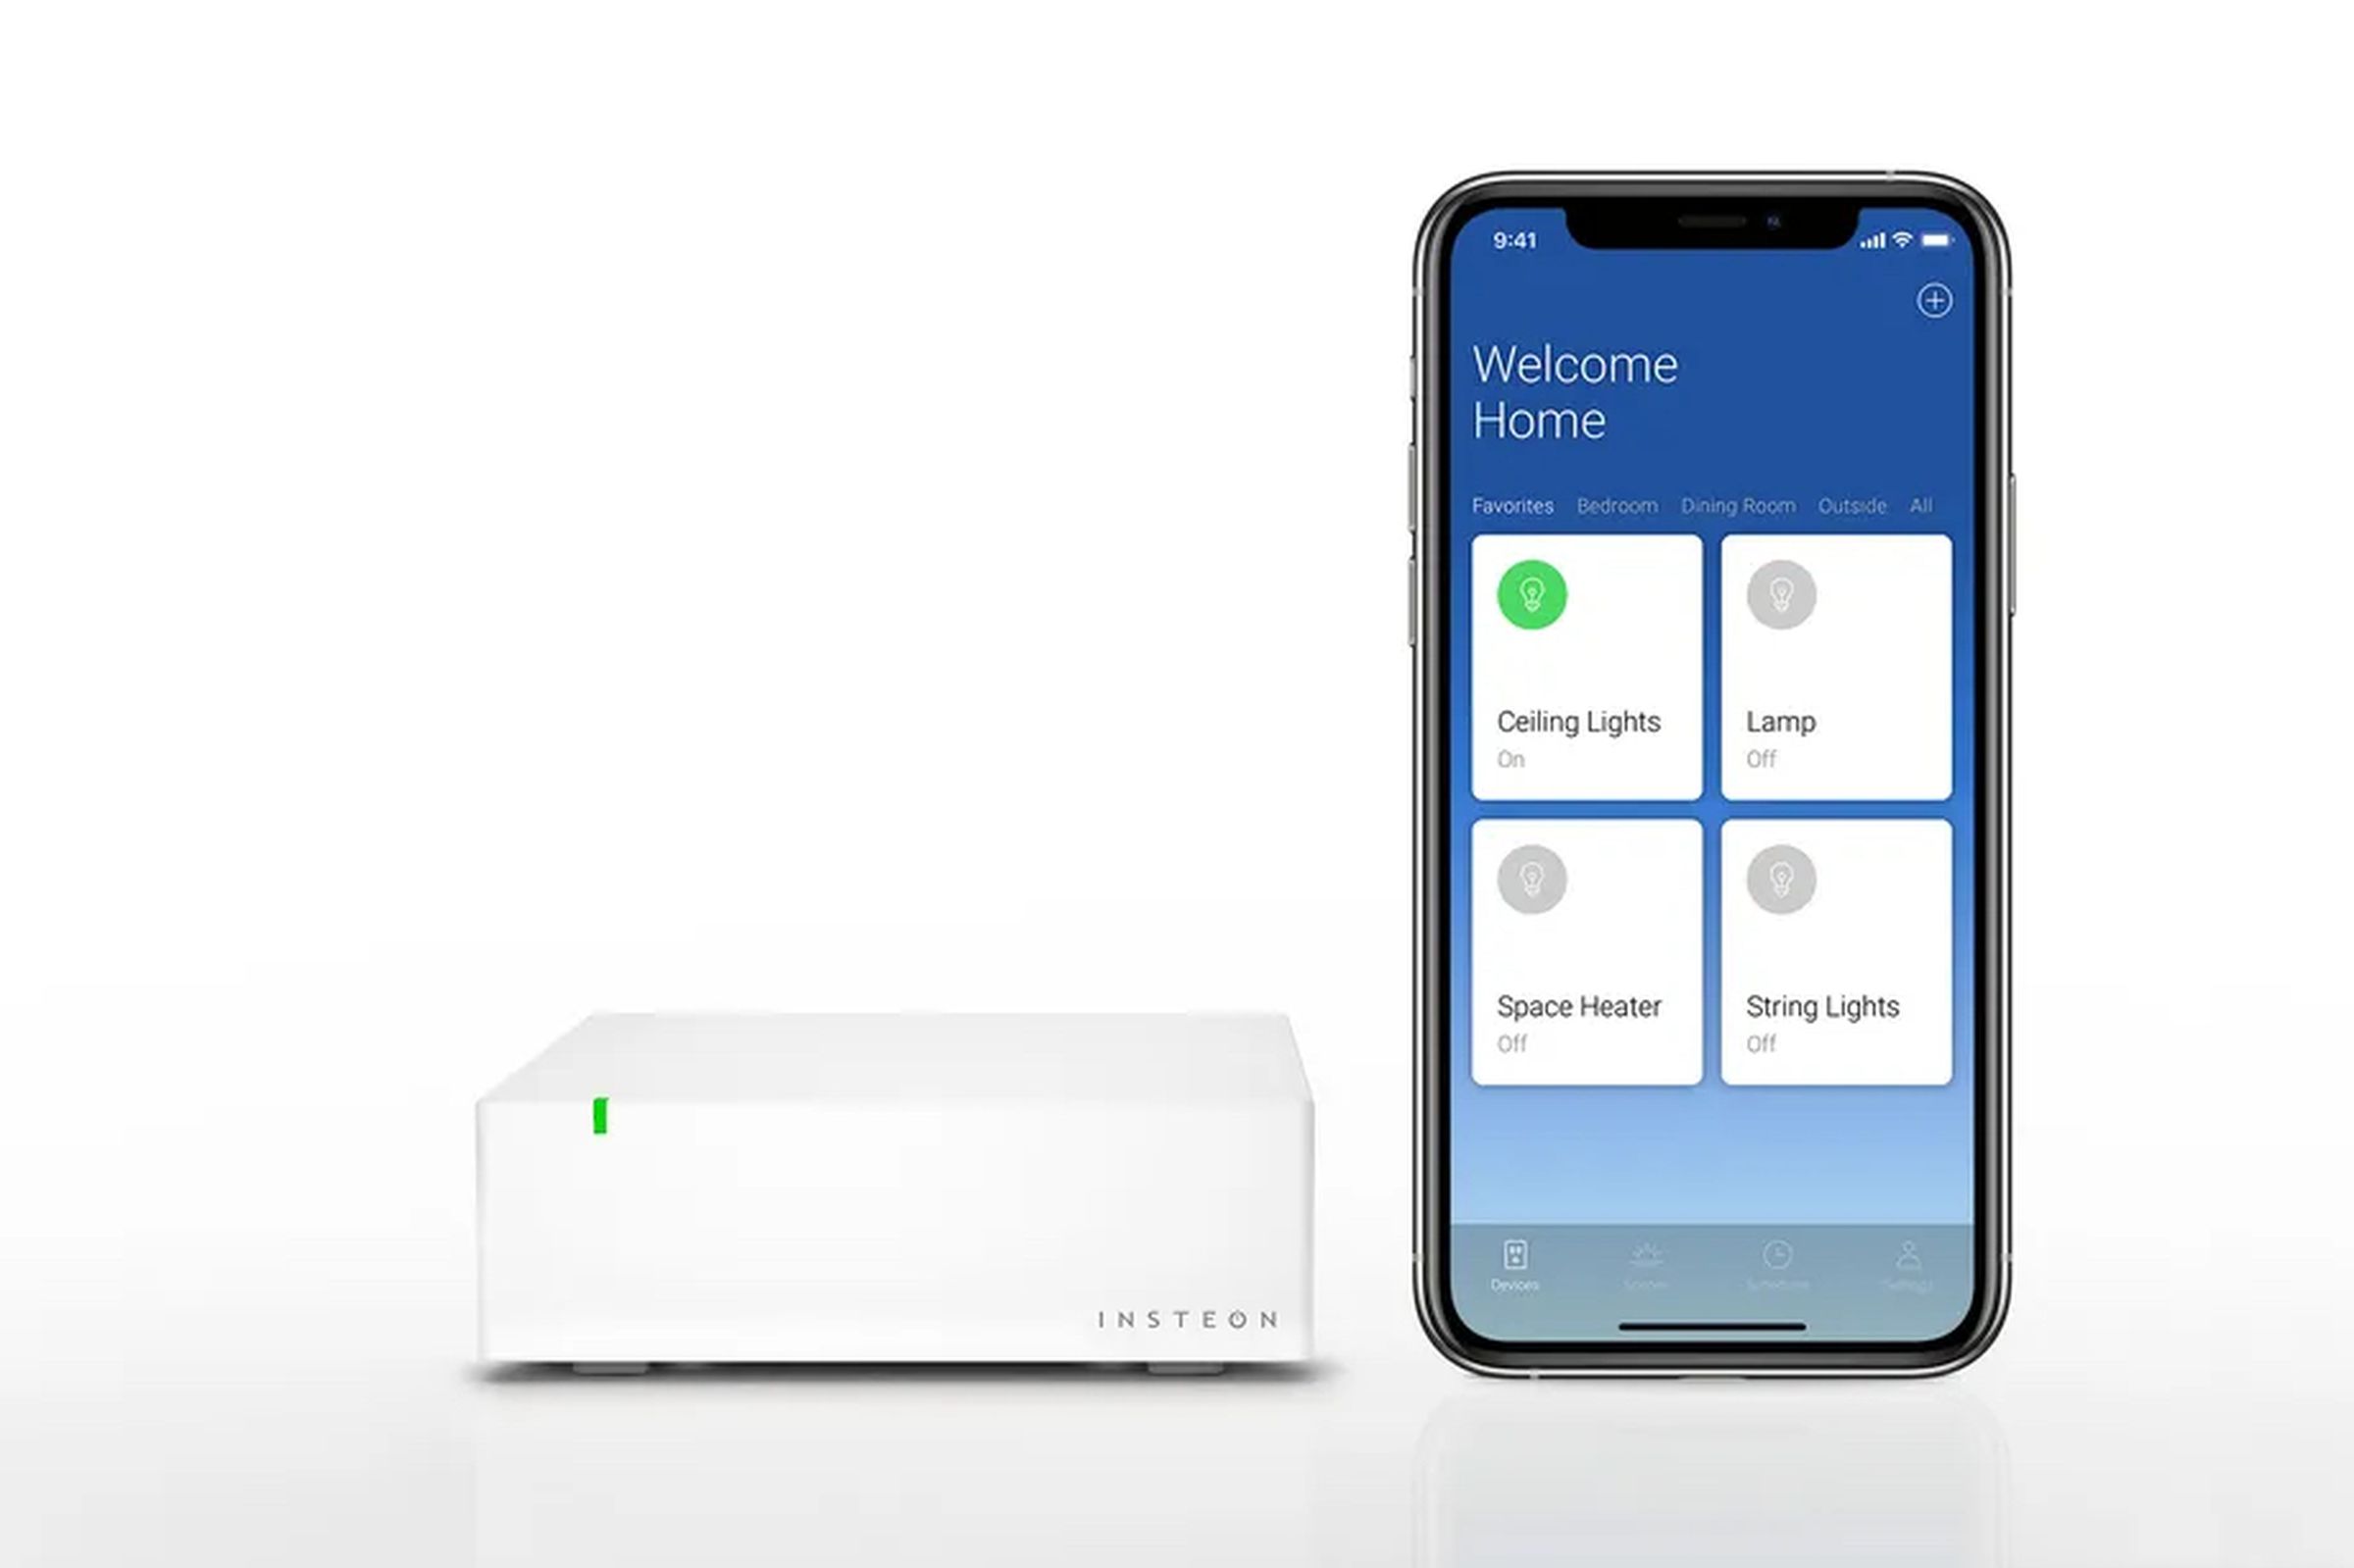 Insteon’s hubs are now back online, but the app is still missing from app stores.